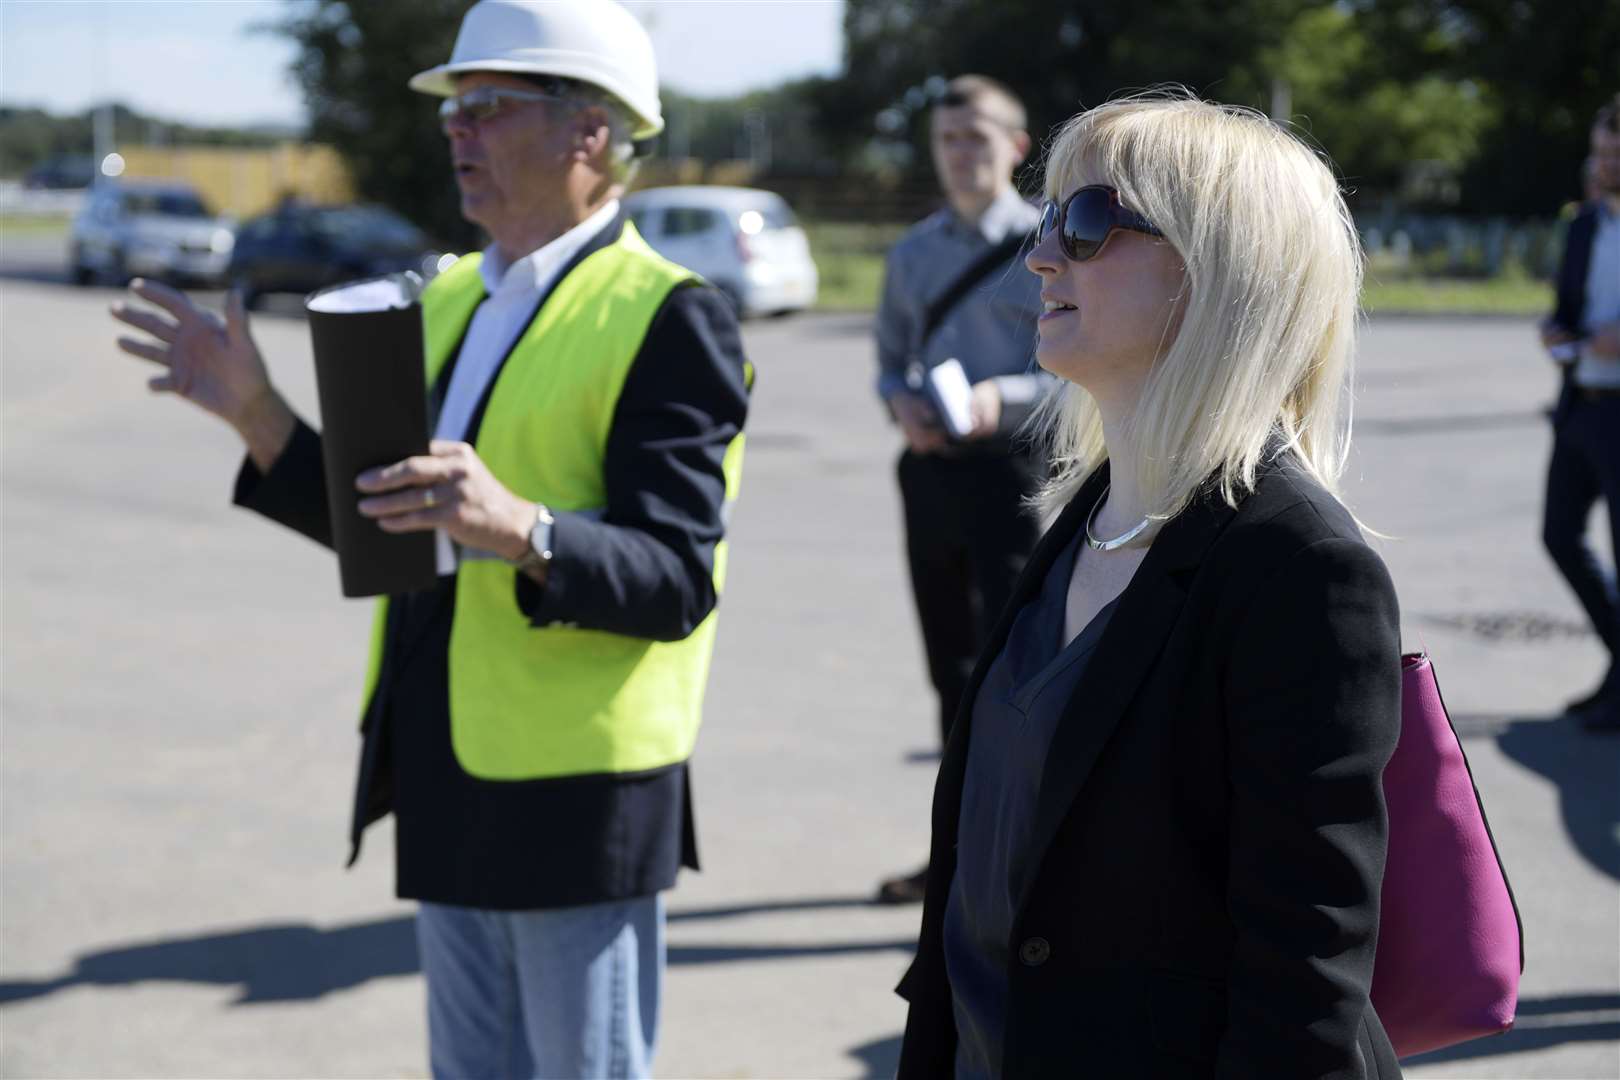 Richard Lavender, president of the Kent Invicta Chamber of Commerce, with MP Rosie Duffield at the site